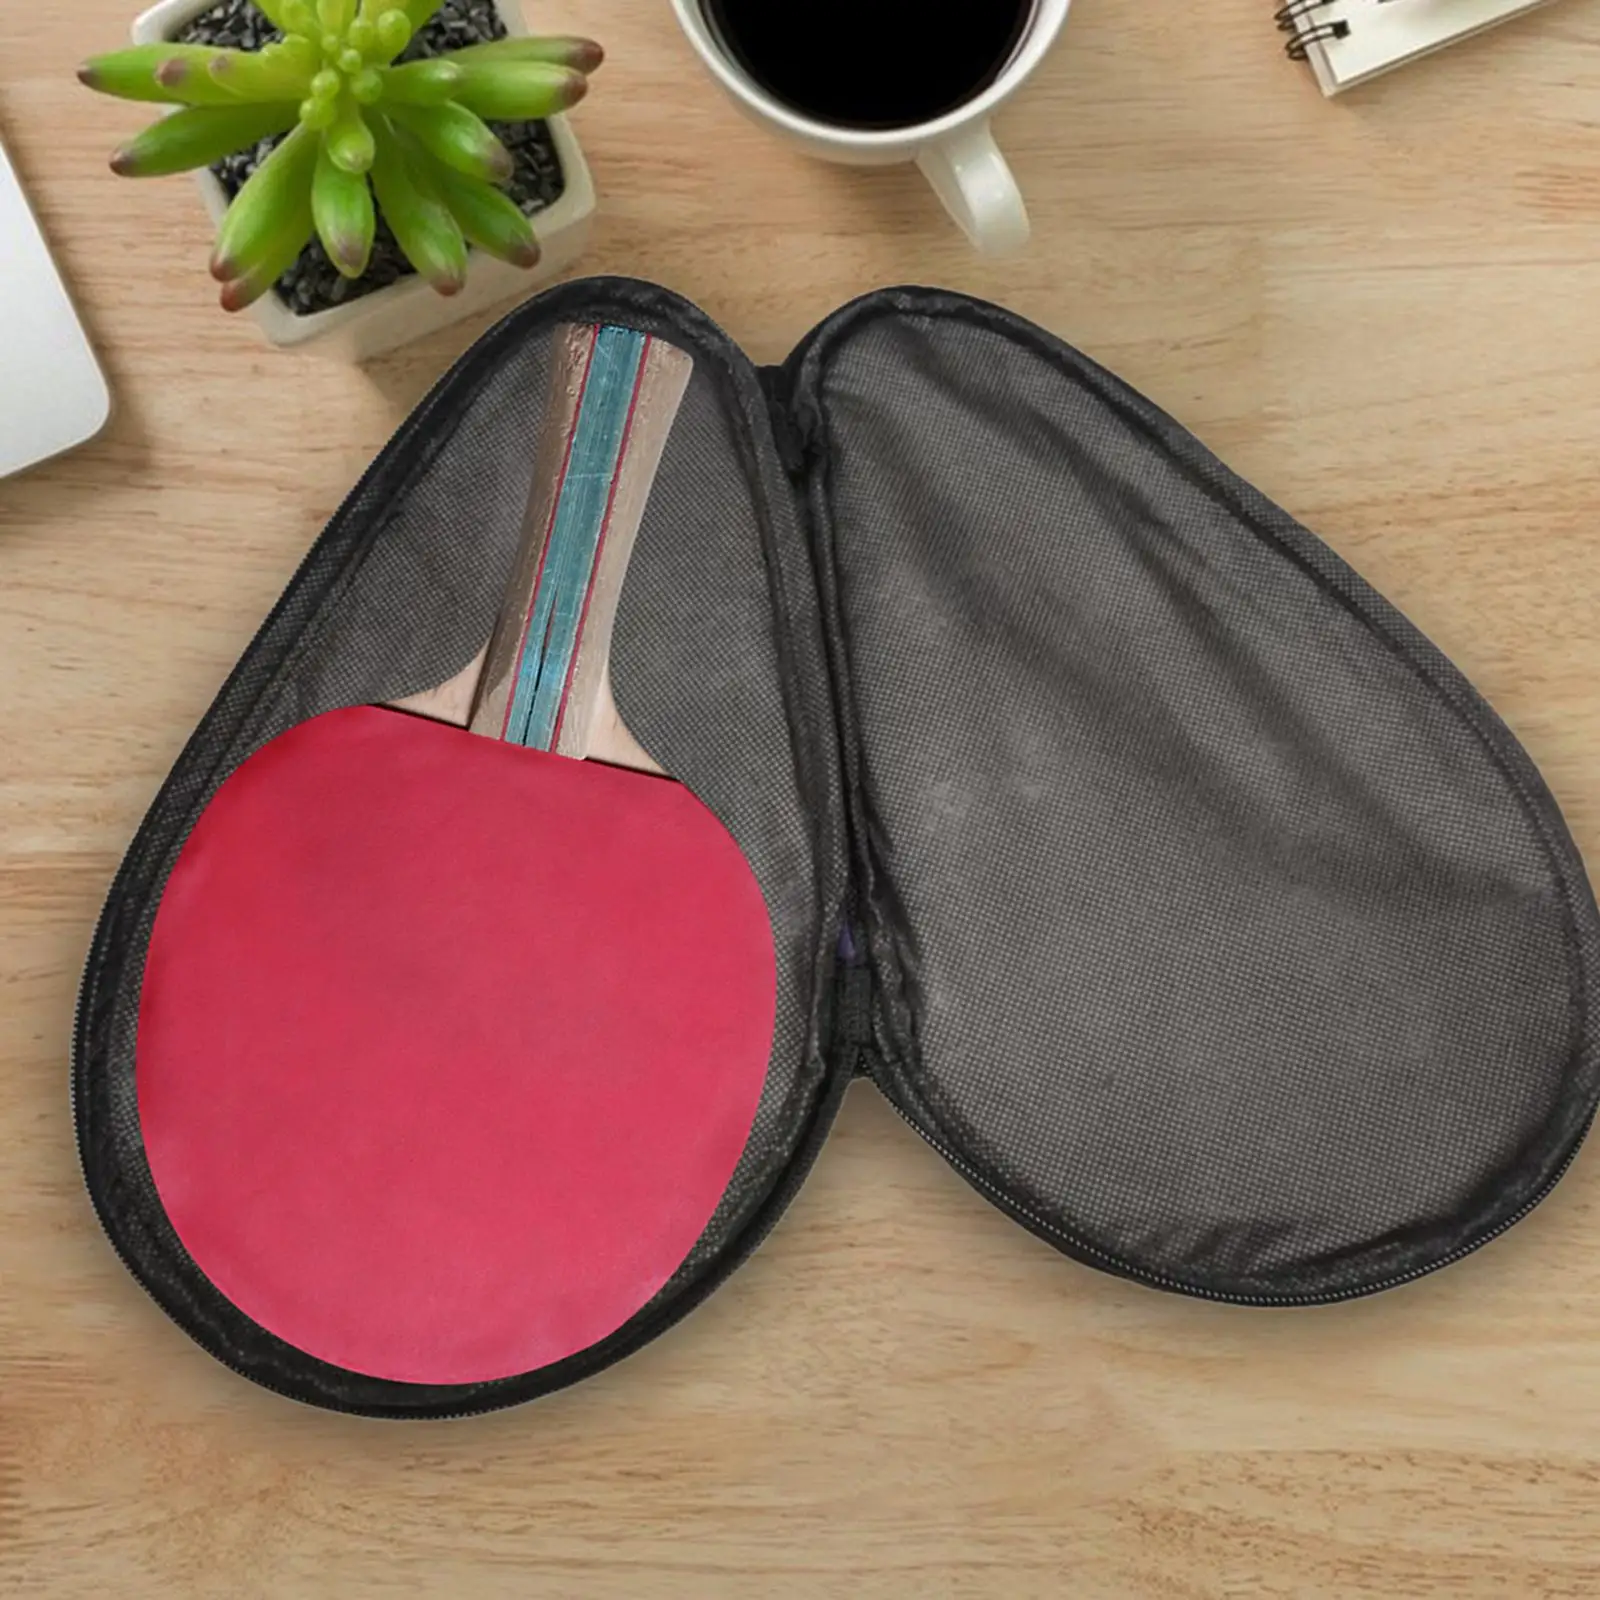 Ping Pong Paddle Case Lightweight Rainproof PVC Table Tennis Cover Ping Pong Paddle Sleeve for Adult Home Gym Sportsman